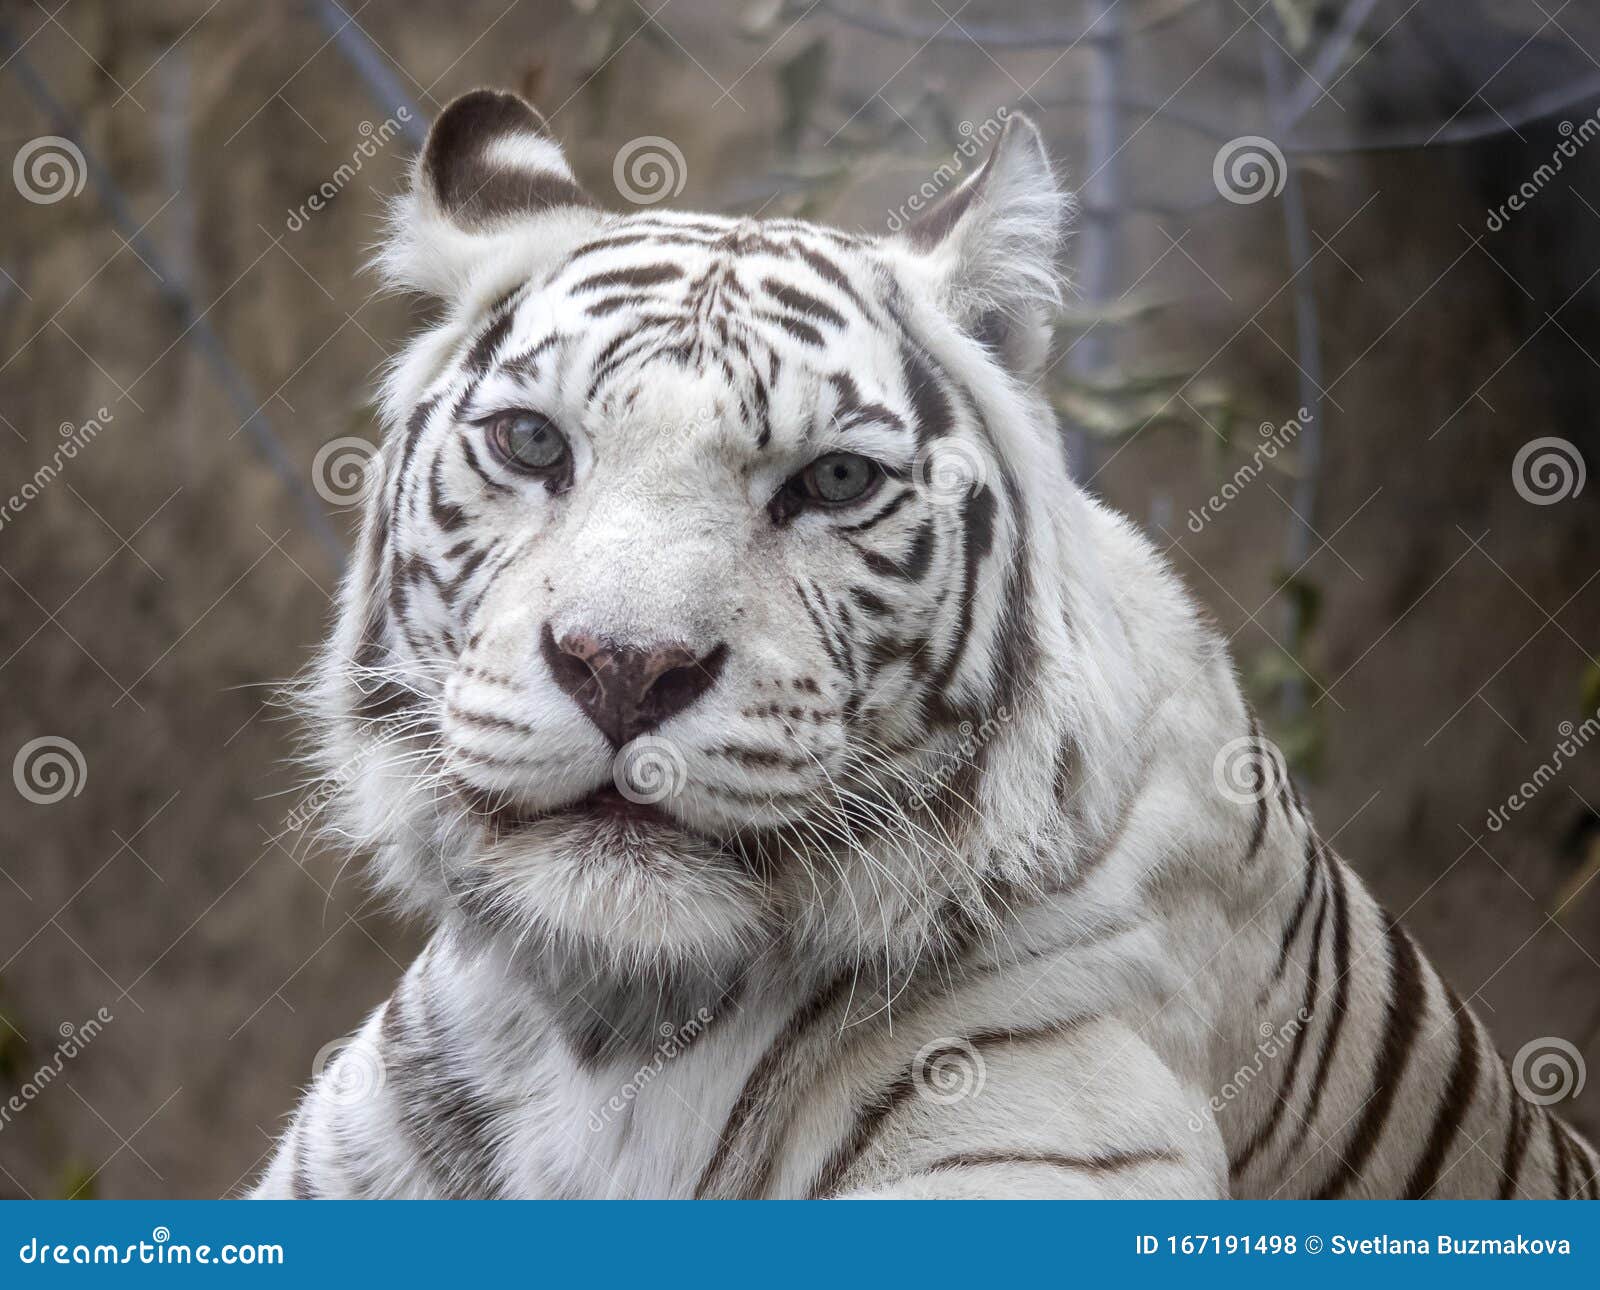 White Bengal Tiger. Smart Blue Eyes, Original Color, Well-groomed Coat Show  the Beauty of the Animal Stock Photo - Image of jungle, circus: 167191498